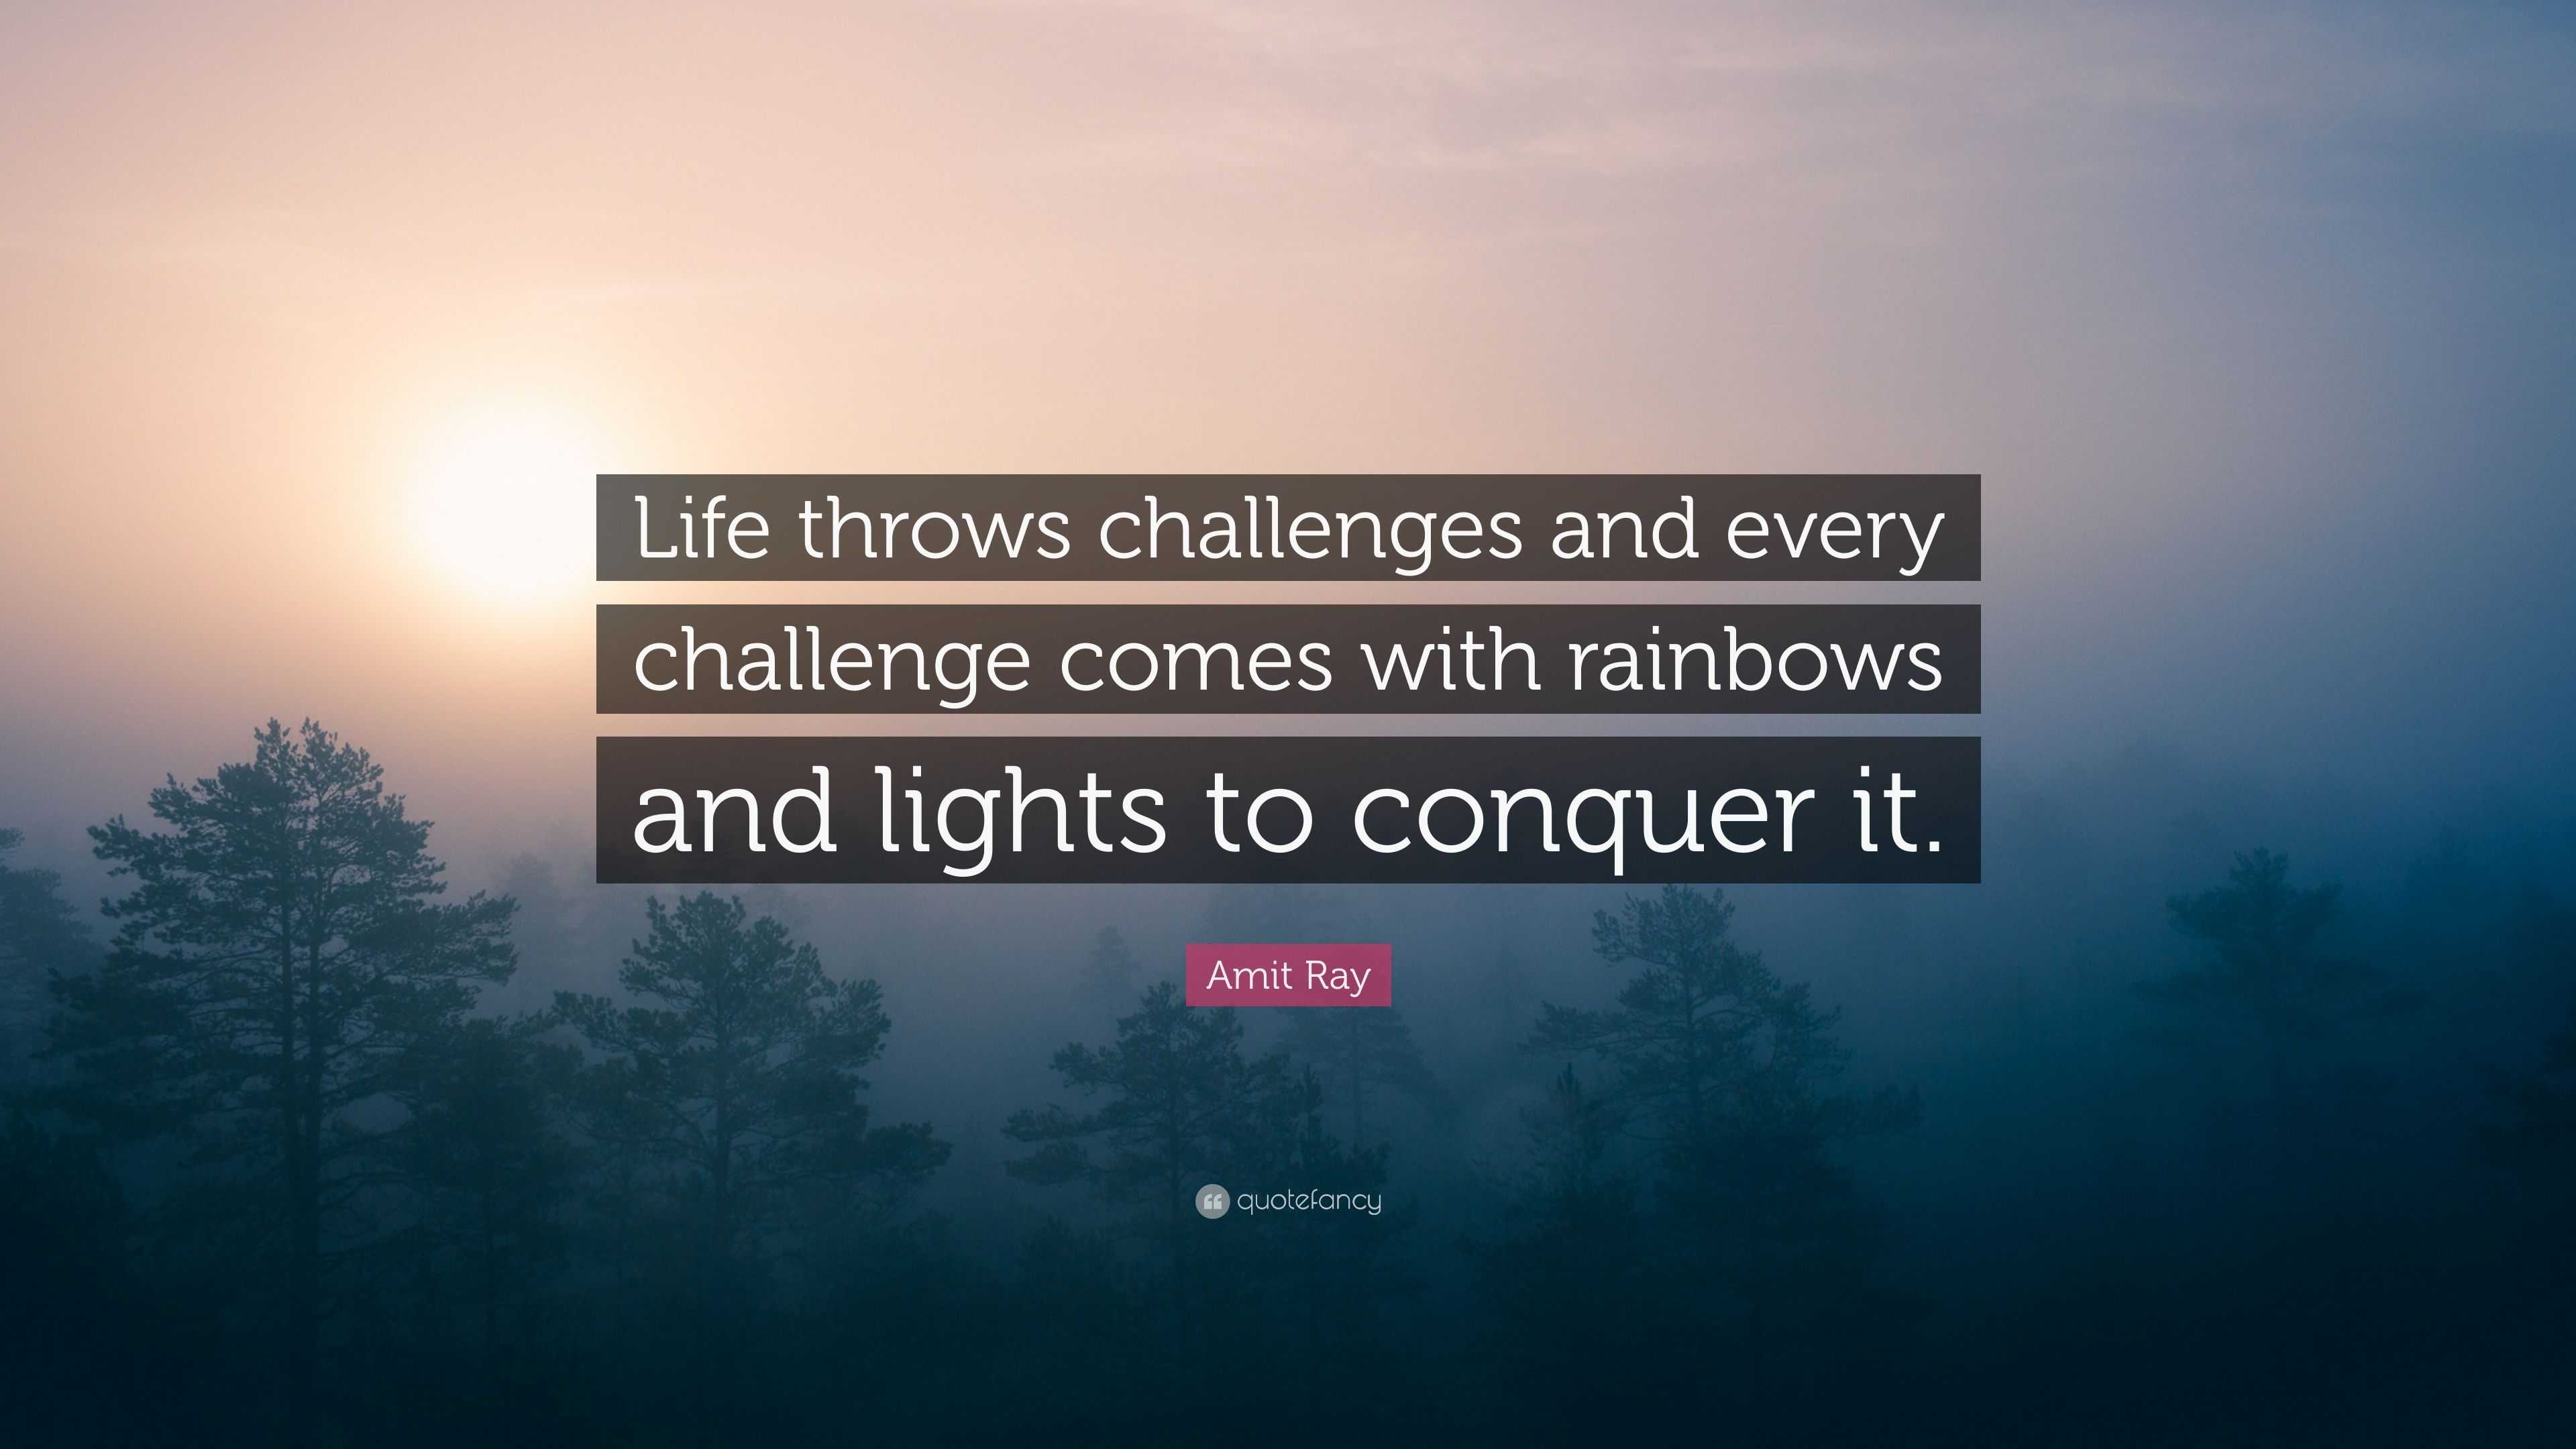 Amit Ray Quote: “Life throws challenges and every challenge comes with